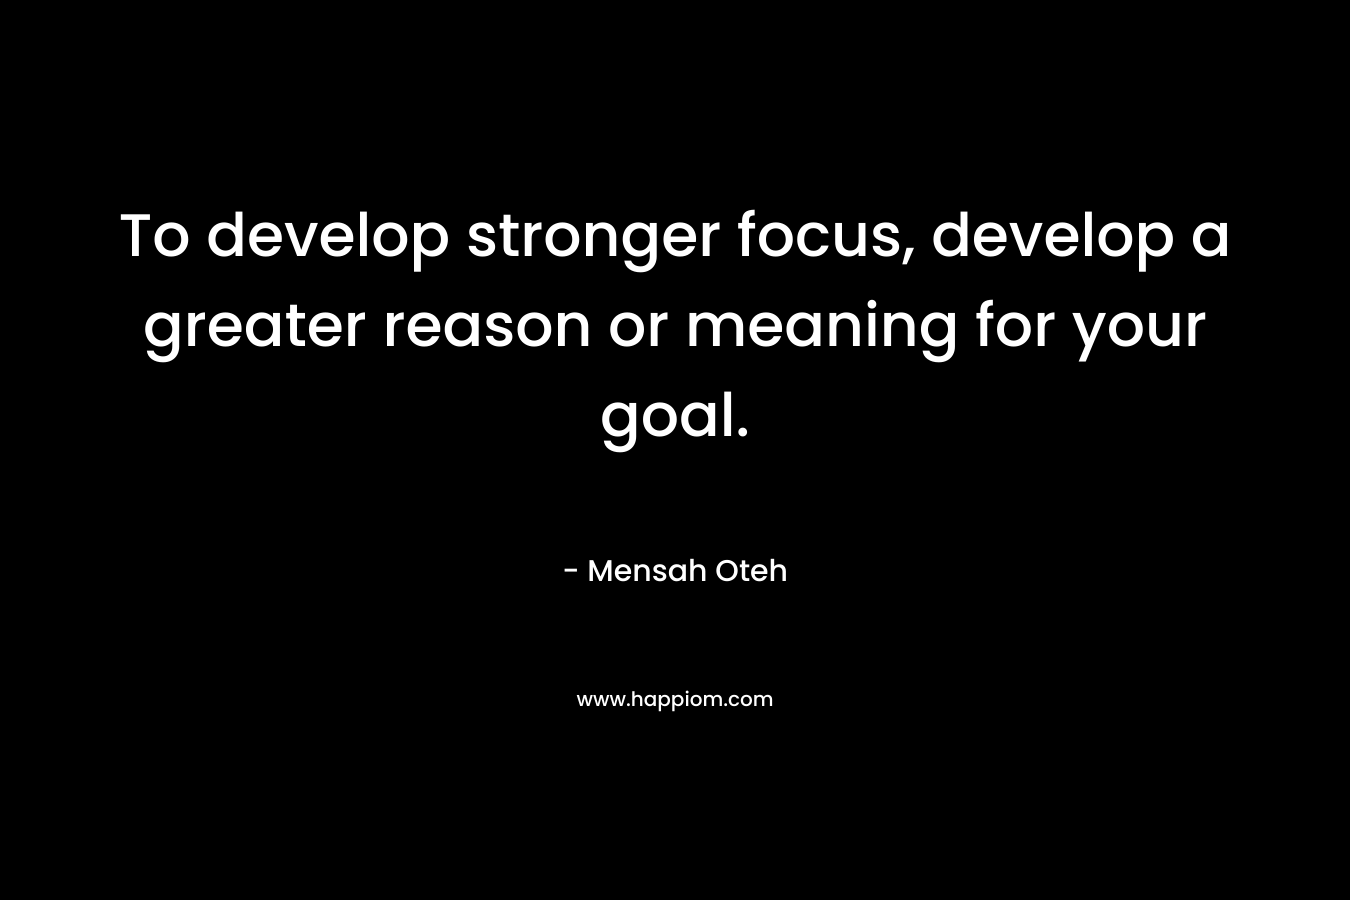 To develop stronger focus, develop a greater reason or meaning for your goal.